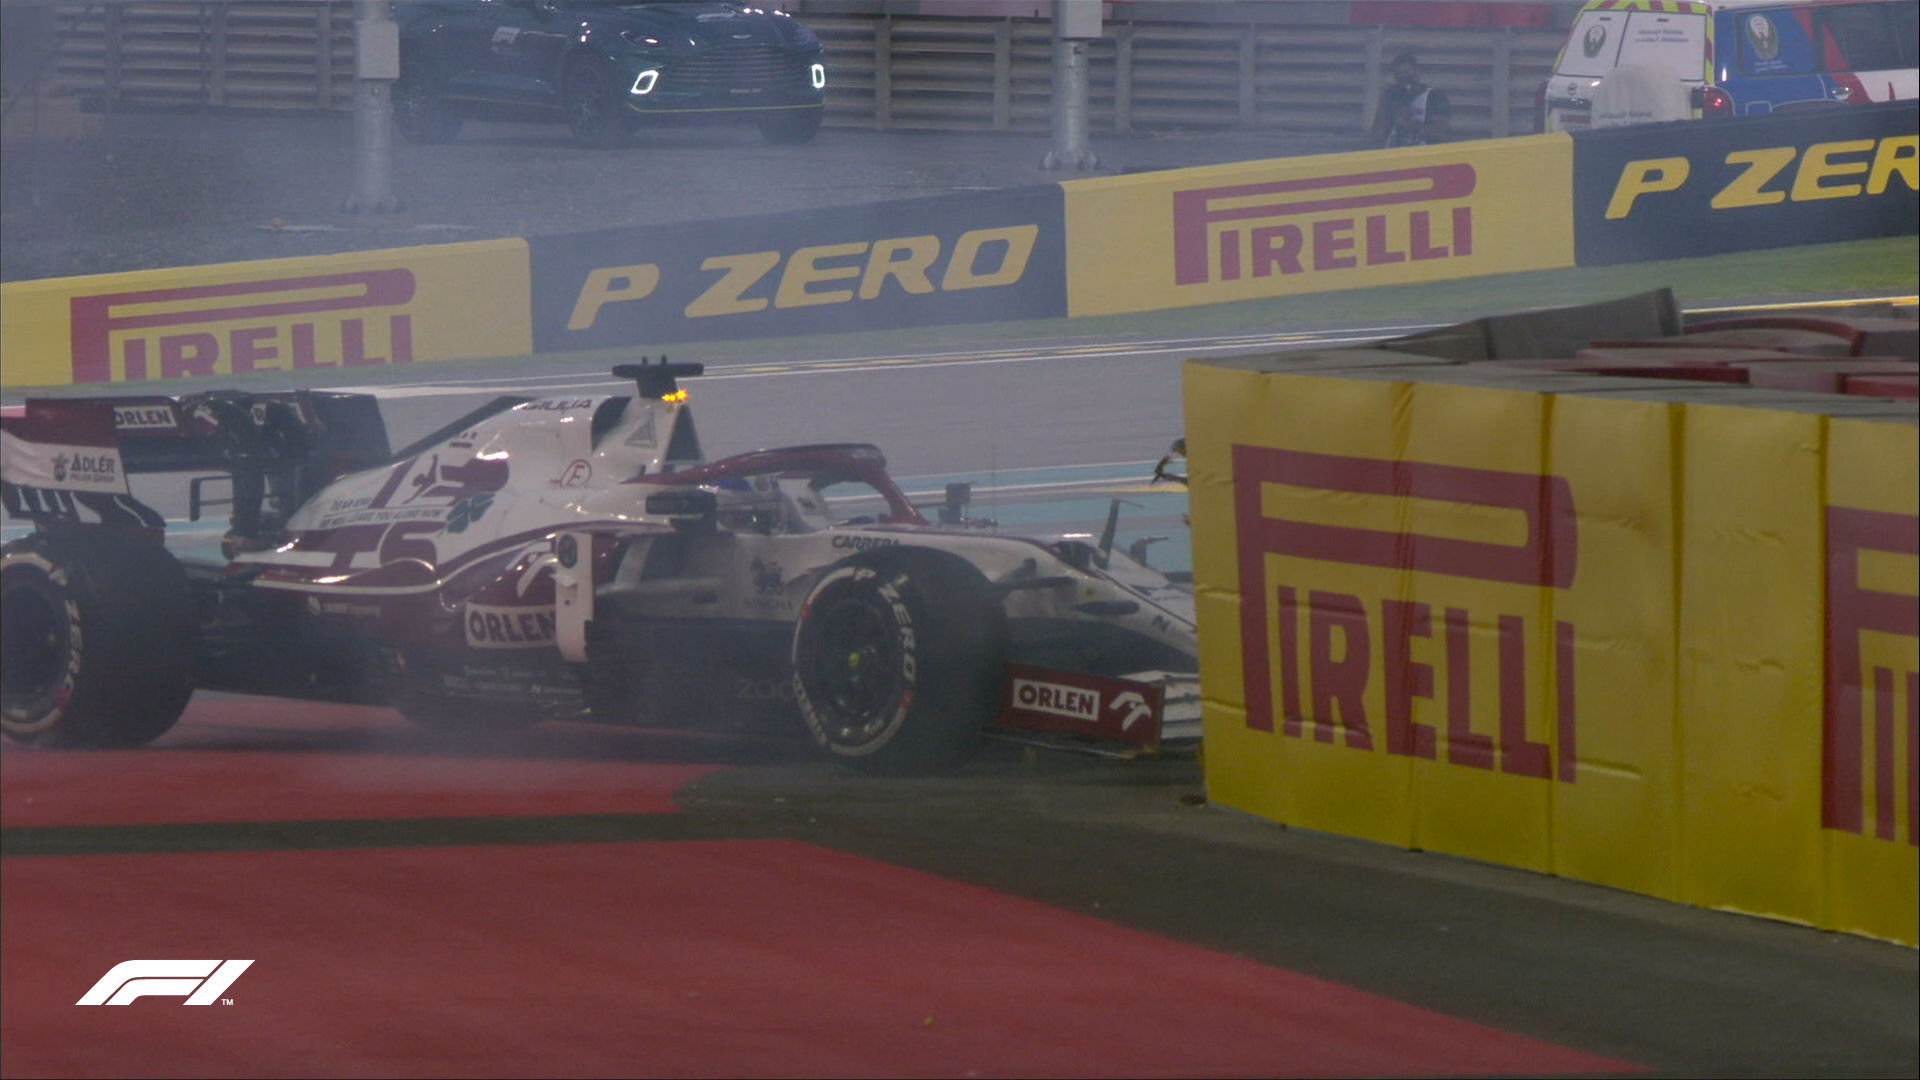 Kimi Raikkonen’s F1 career comes to an end with braking issue at Abu Dhabi GP